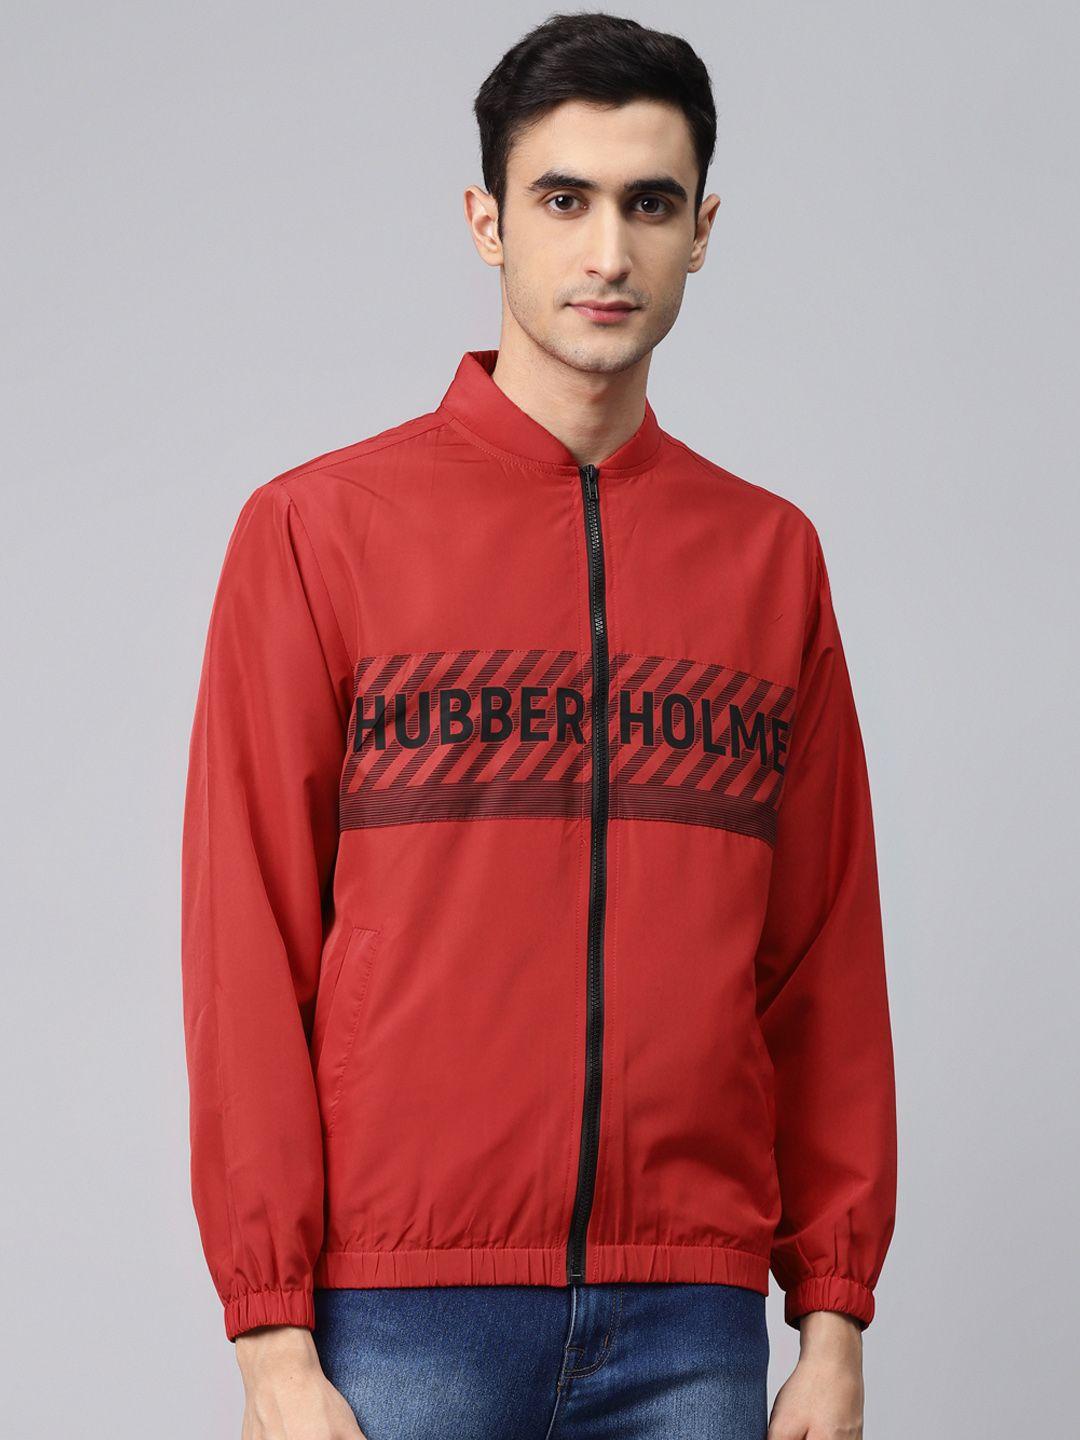 hubberholme-men-red-&-black-printed-windcheater-and-water-resistant-tailored-jacket